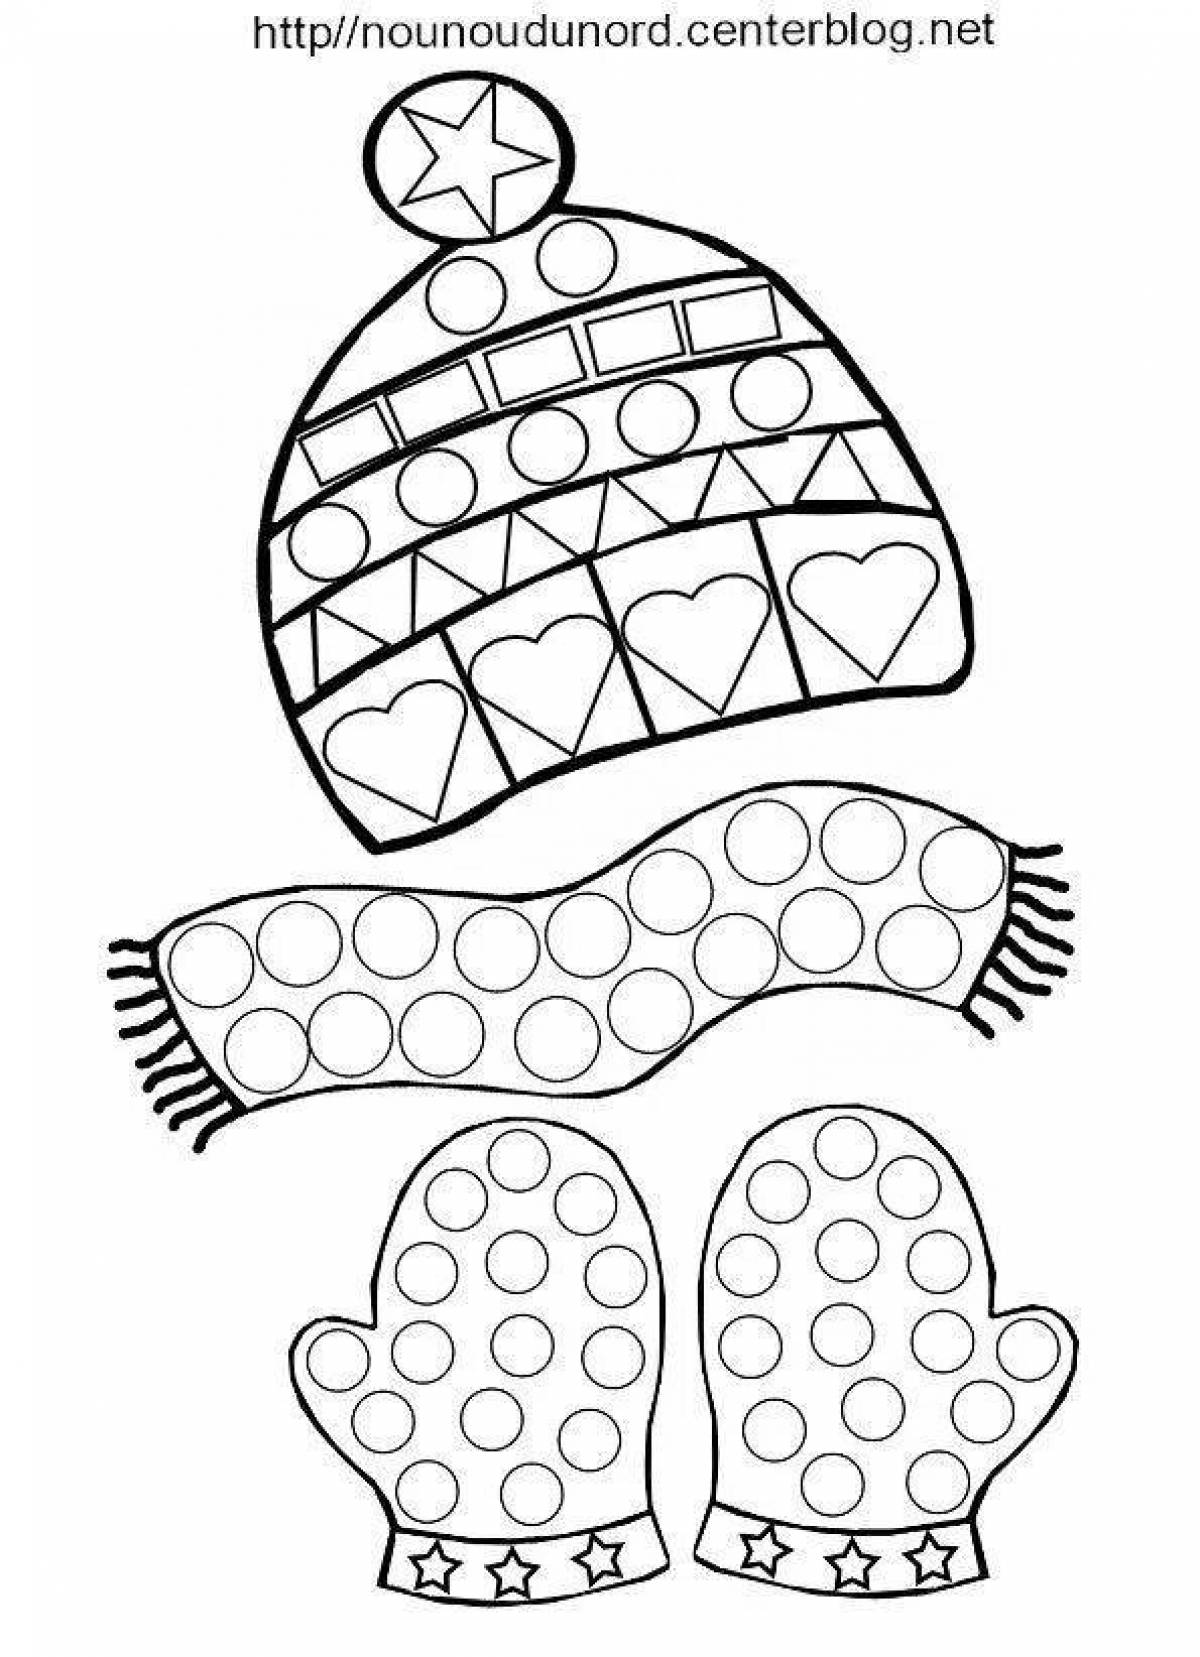 Coloring page magic hat and mittens